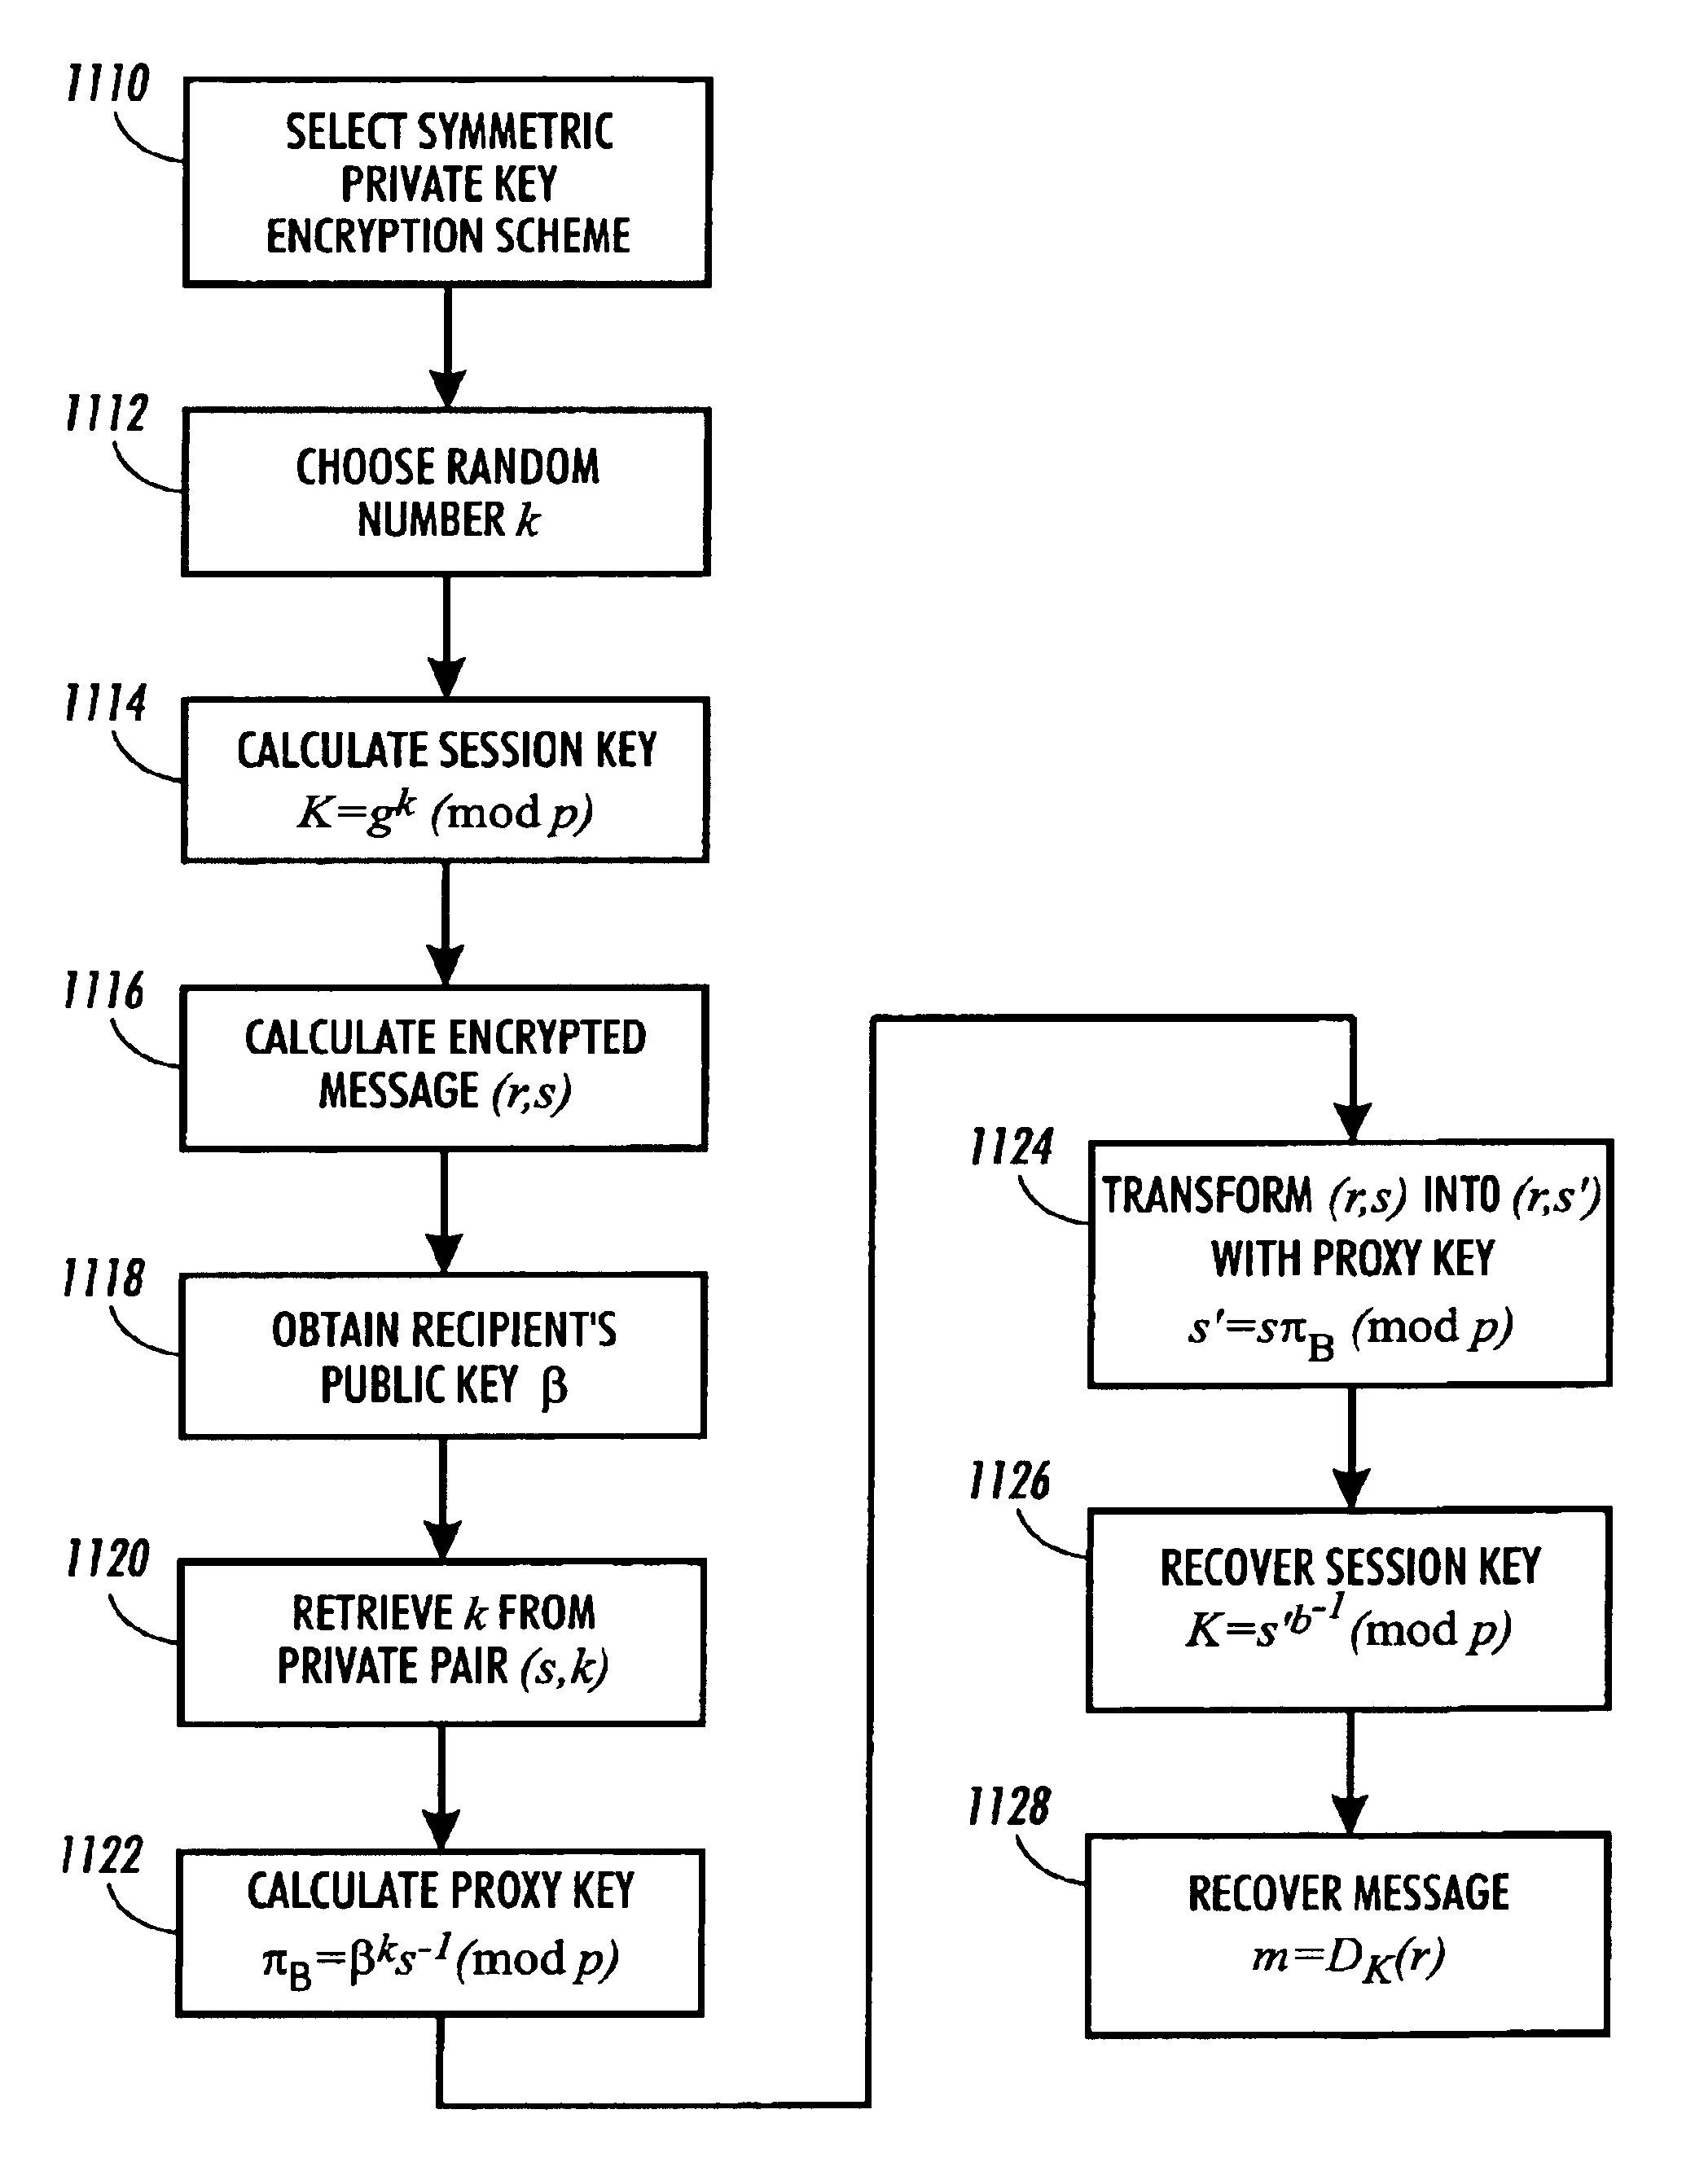 System and method for protecting data files by periodically refreshing a decryption key